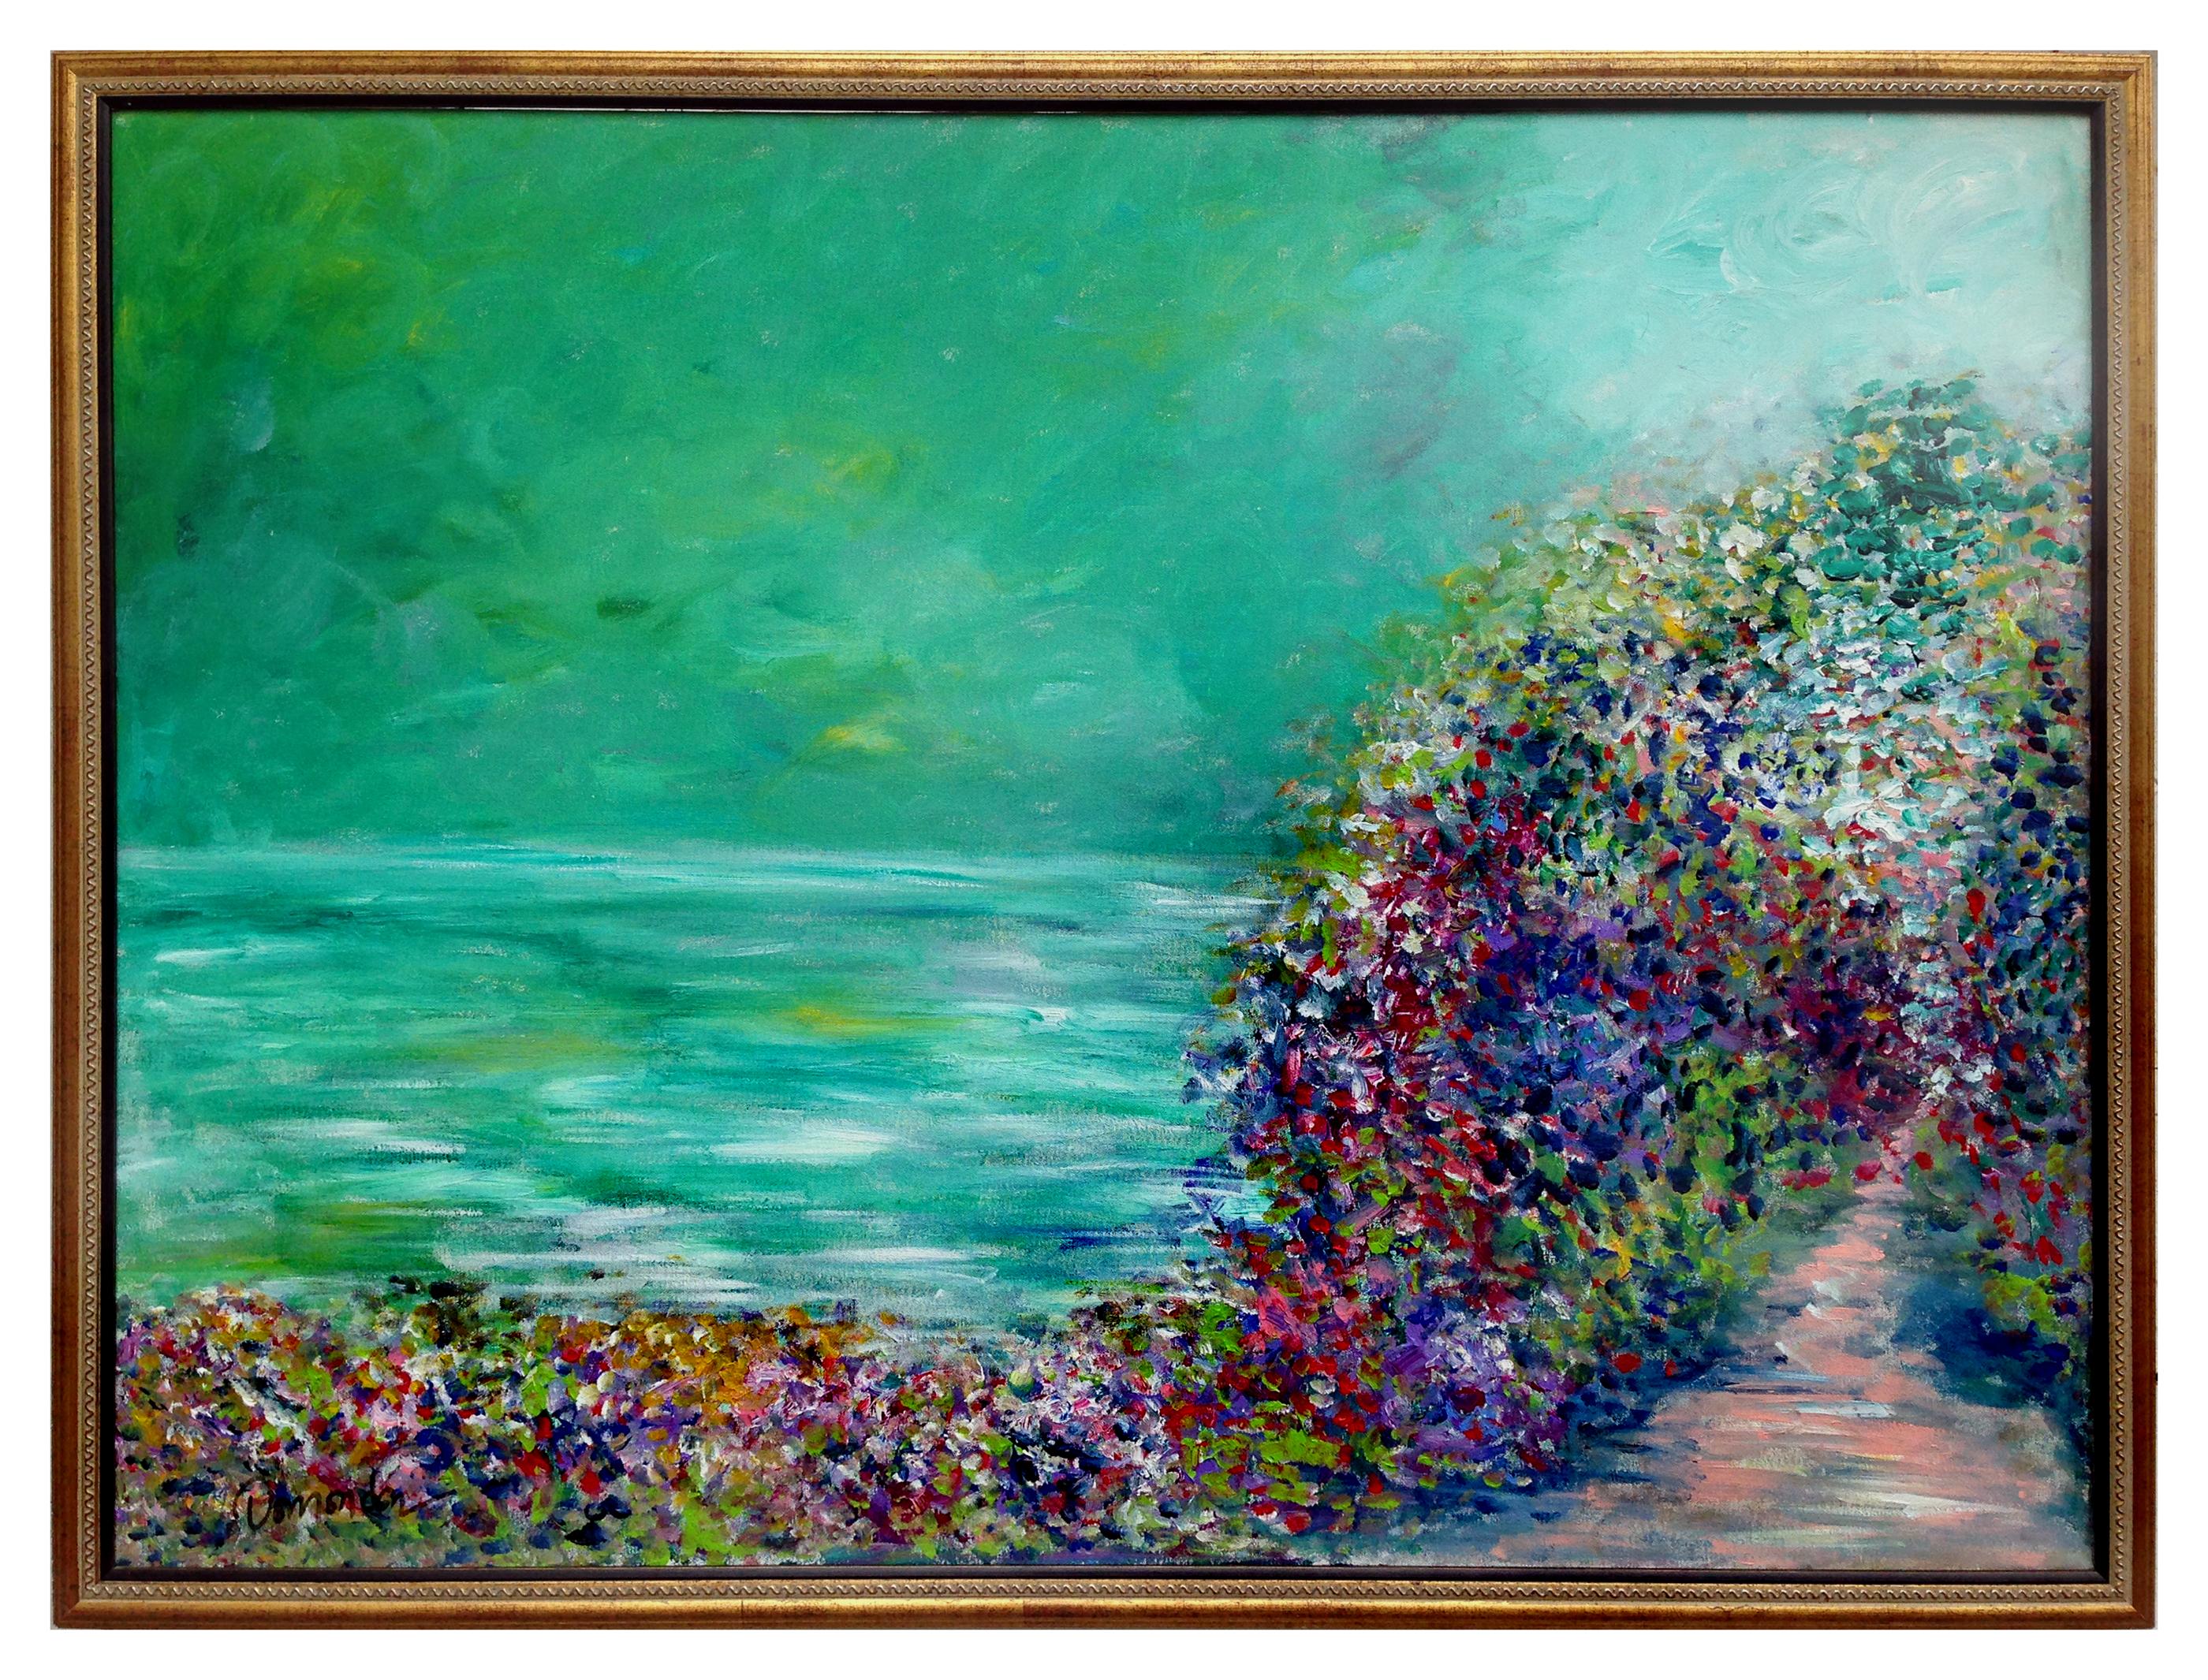 Frederico Domondon Landscape Painting - Floral Arch and Green Lake Landscapeq